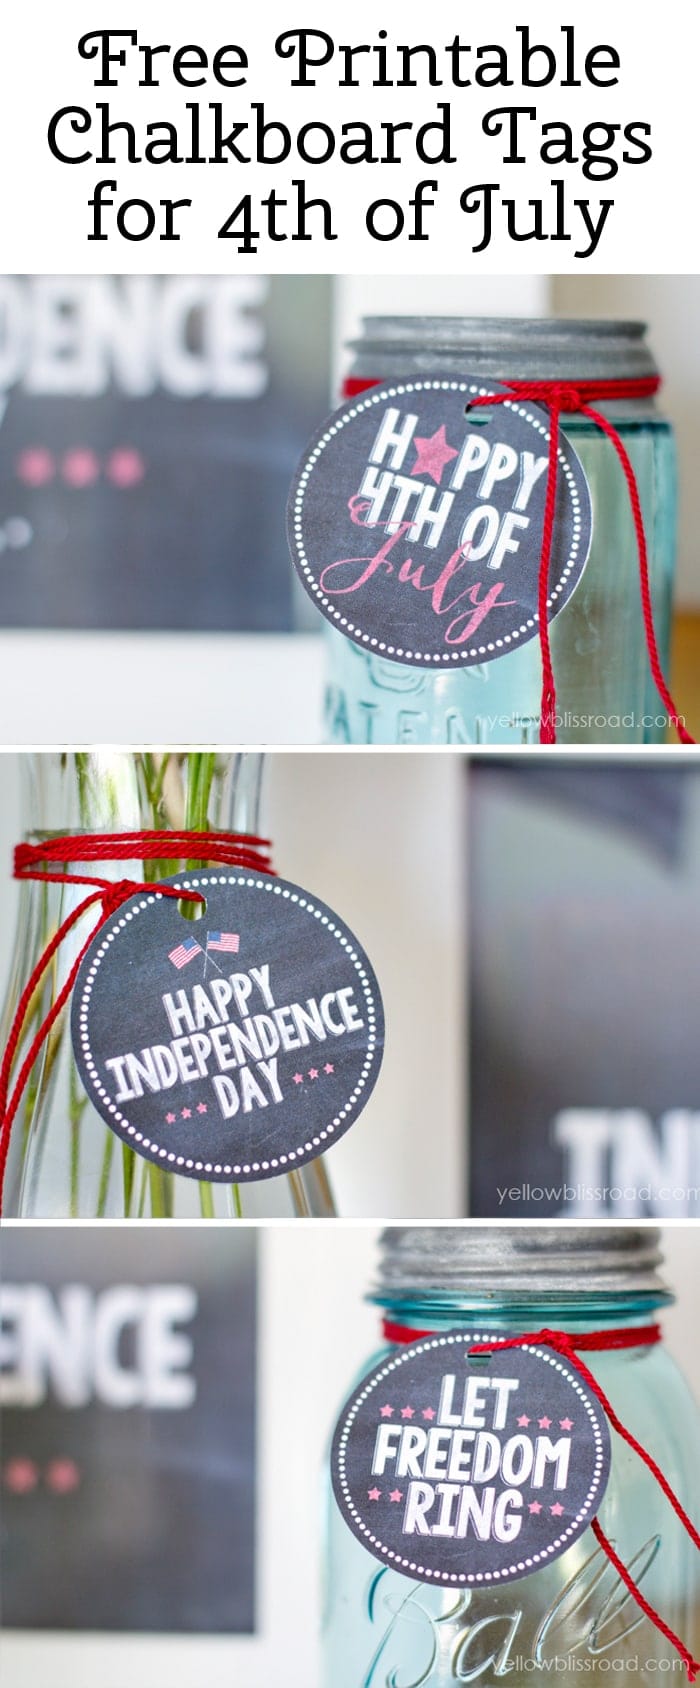 Free Printable Chalkboard tags for 4th of July